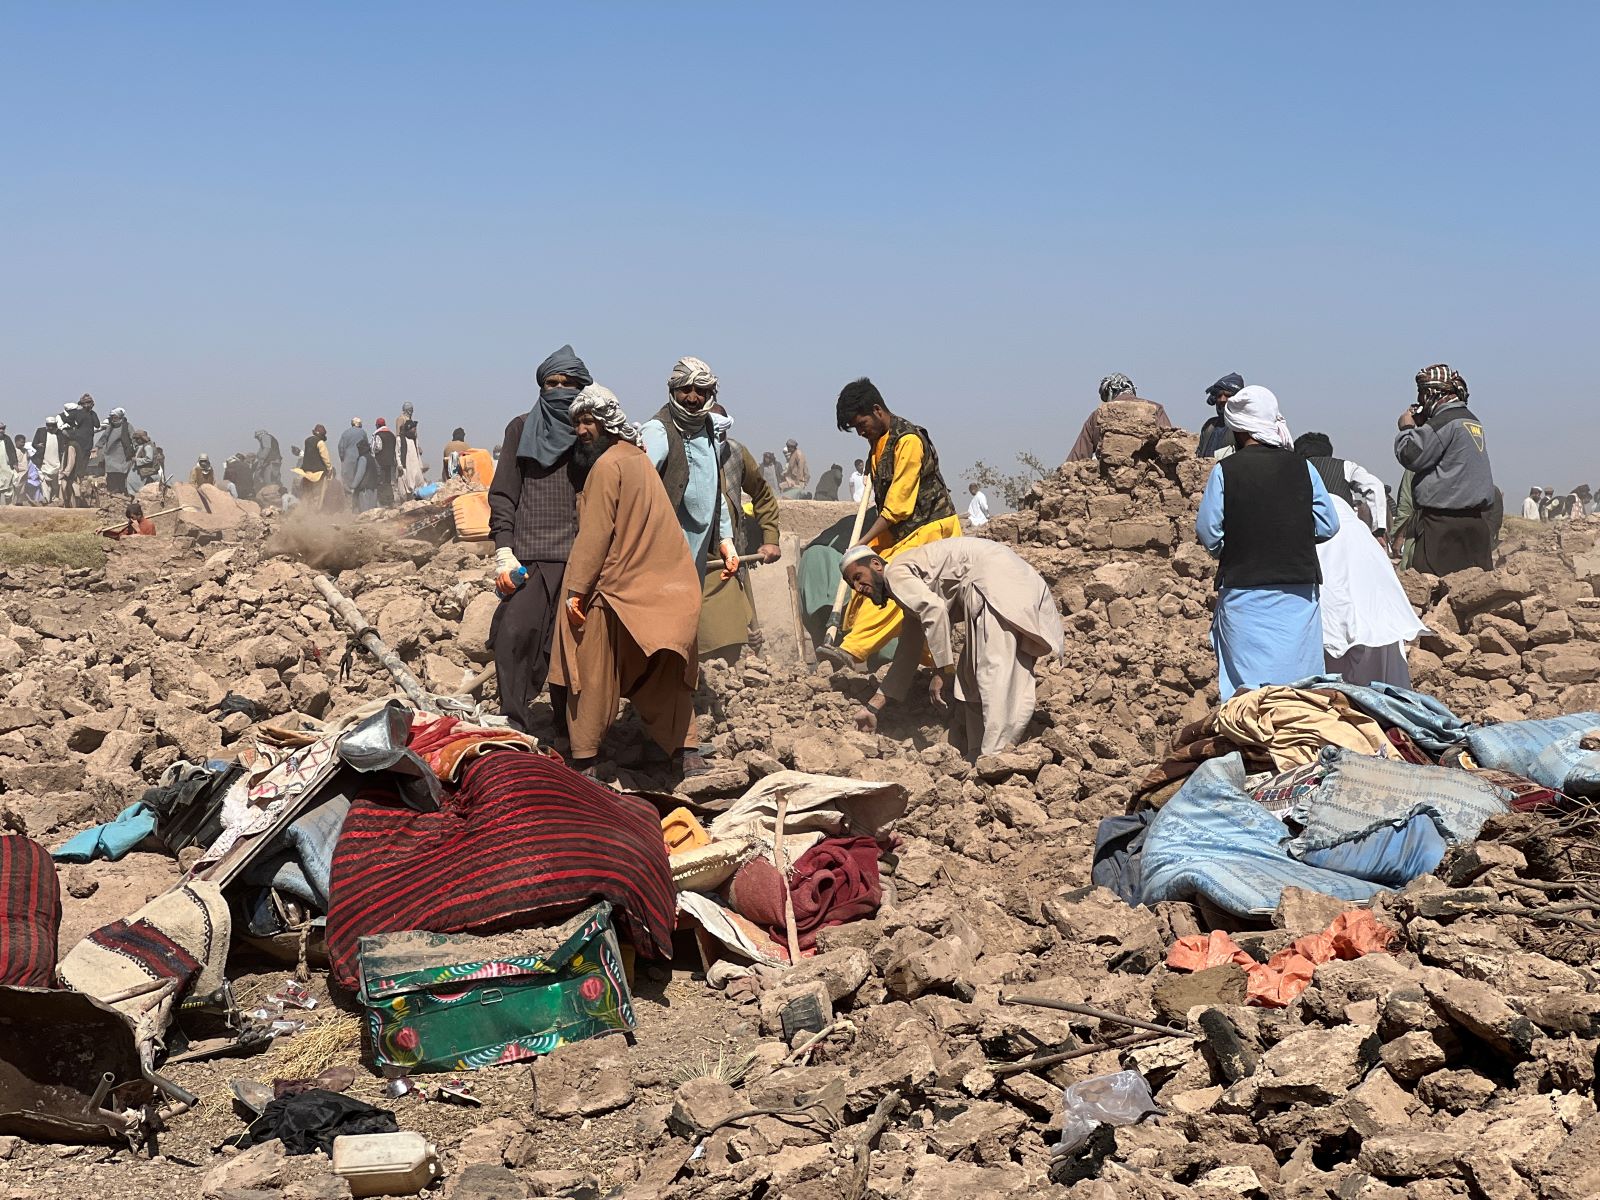 People search among the rubble after an earthquake in Afghanistan